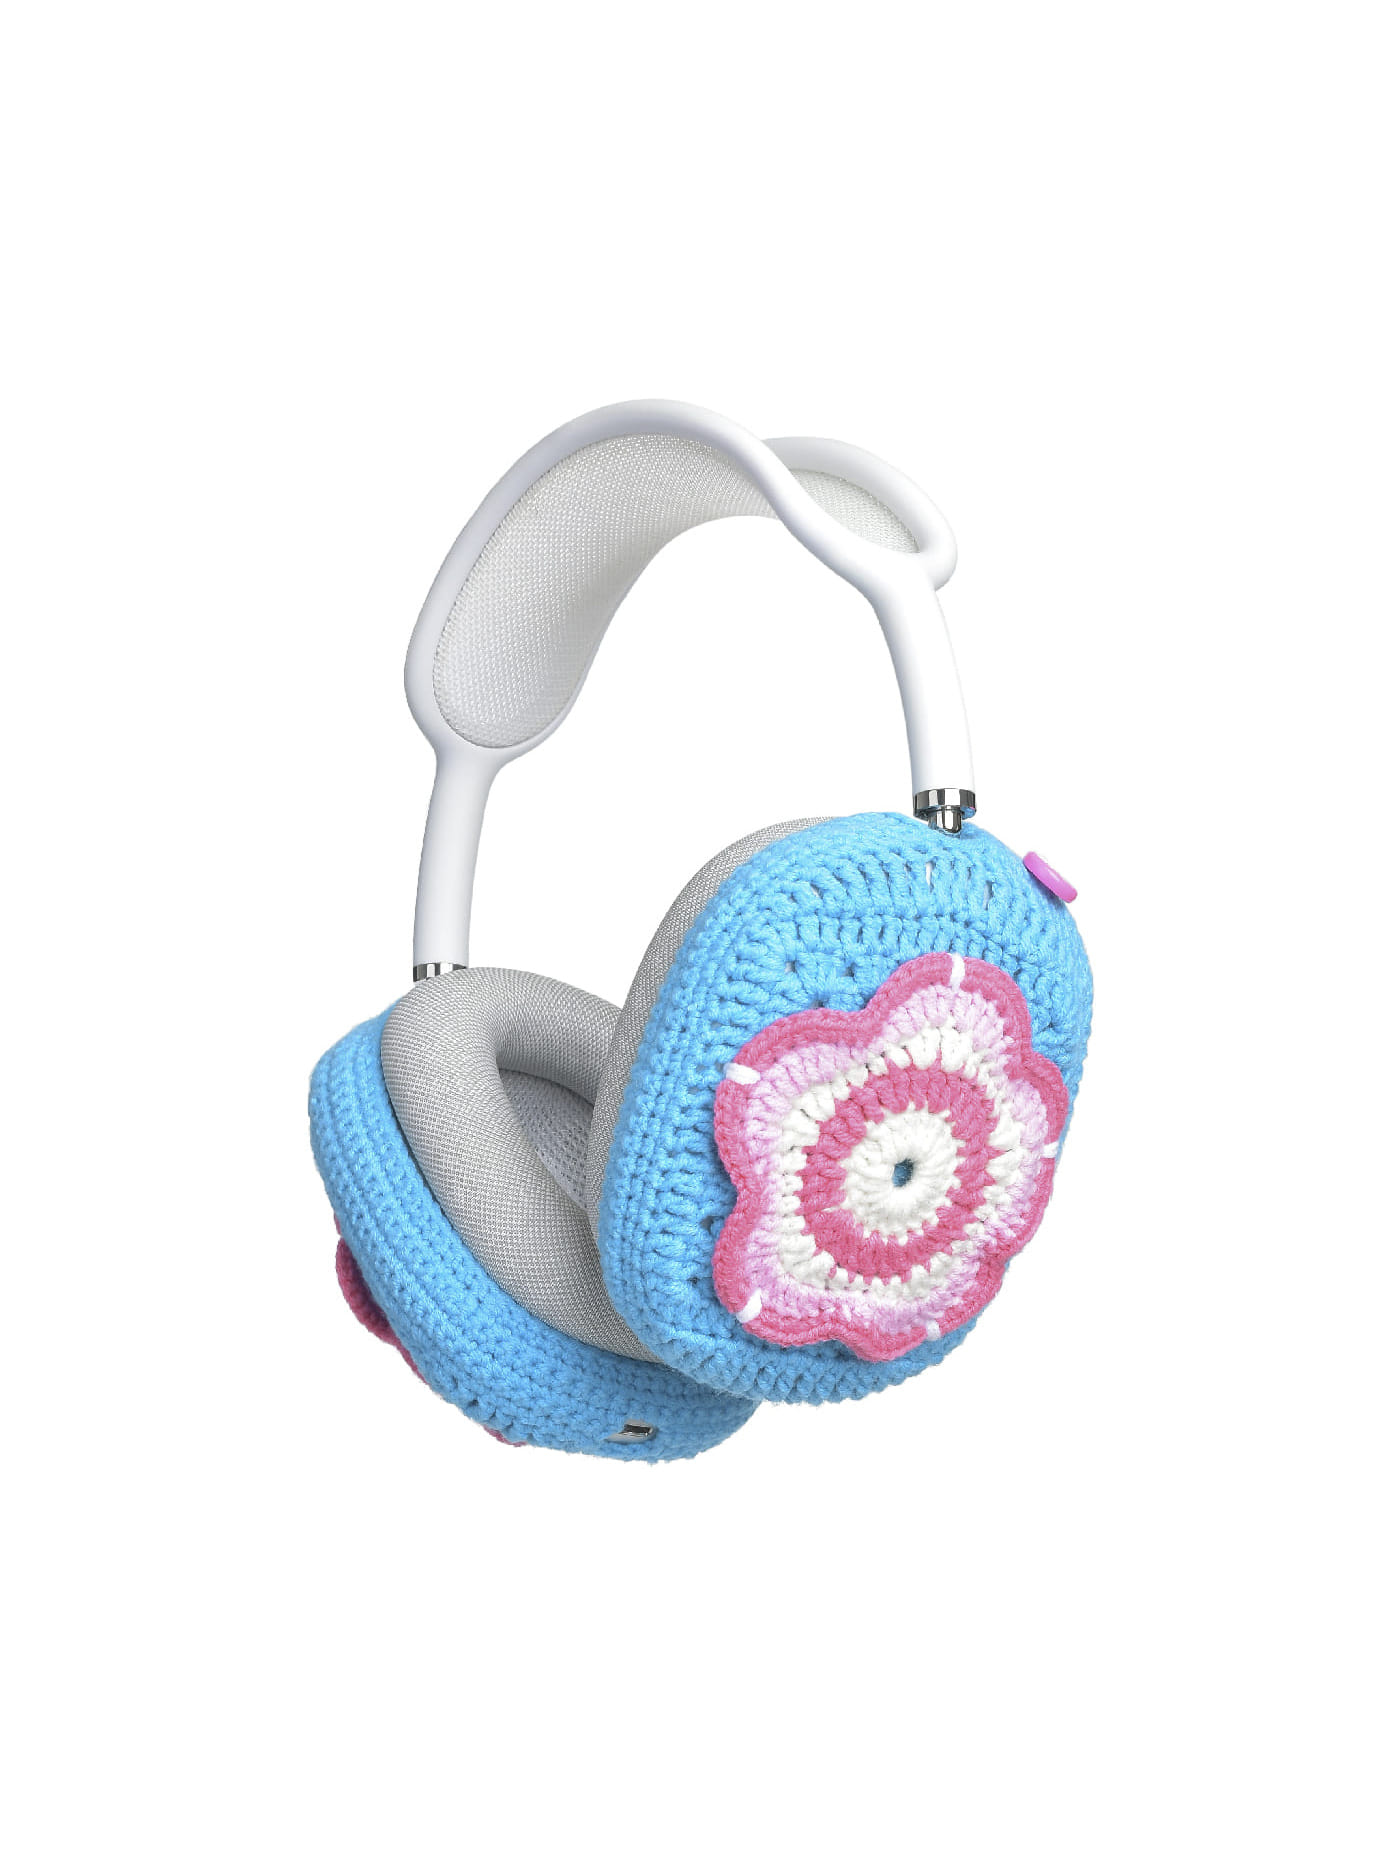 Airpods Max Case - Flower